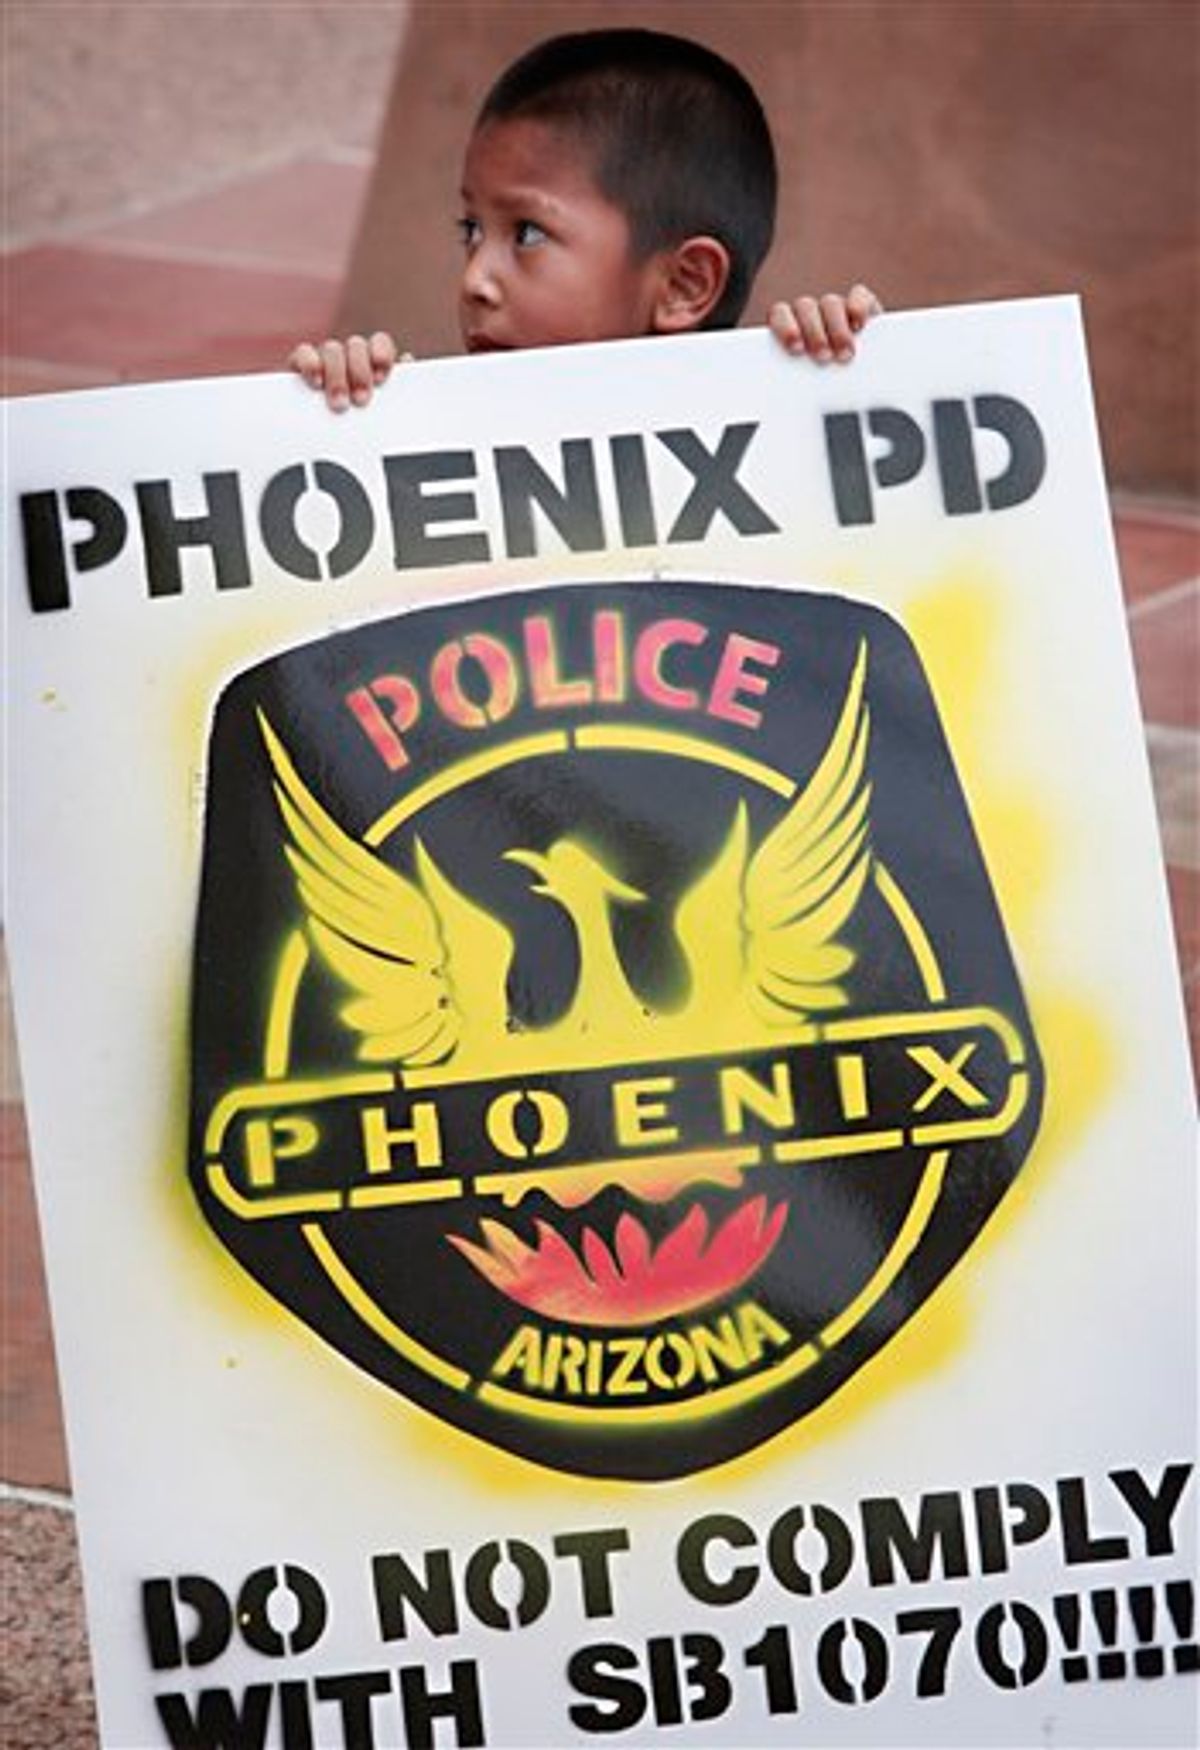 David Castillo, 3, stands with family members outside City Hall Tuesday, July 27, 2010 in Phoenix. Community members from the Puente Movement were petitioning the city to not enforce Arizona's immigration bill, SB 1070, which takes effect Thursday, July 29th. (AP Photo/Matt York) (AP)